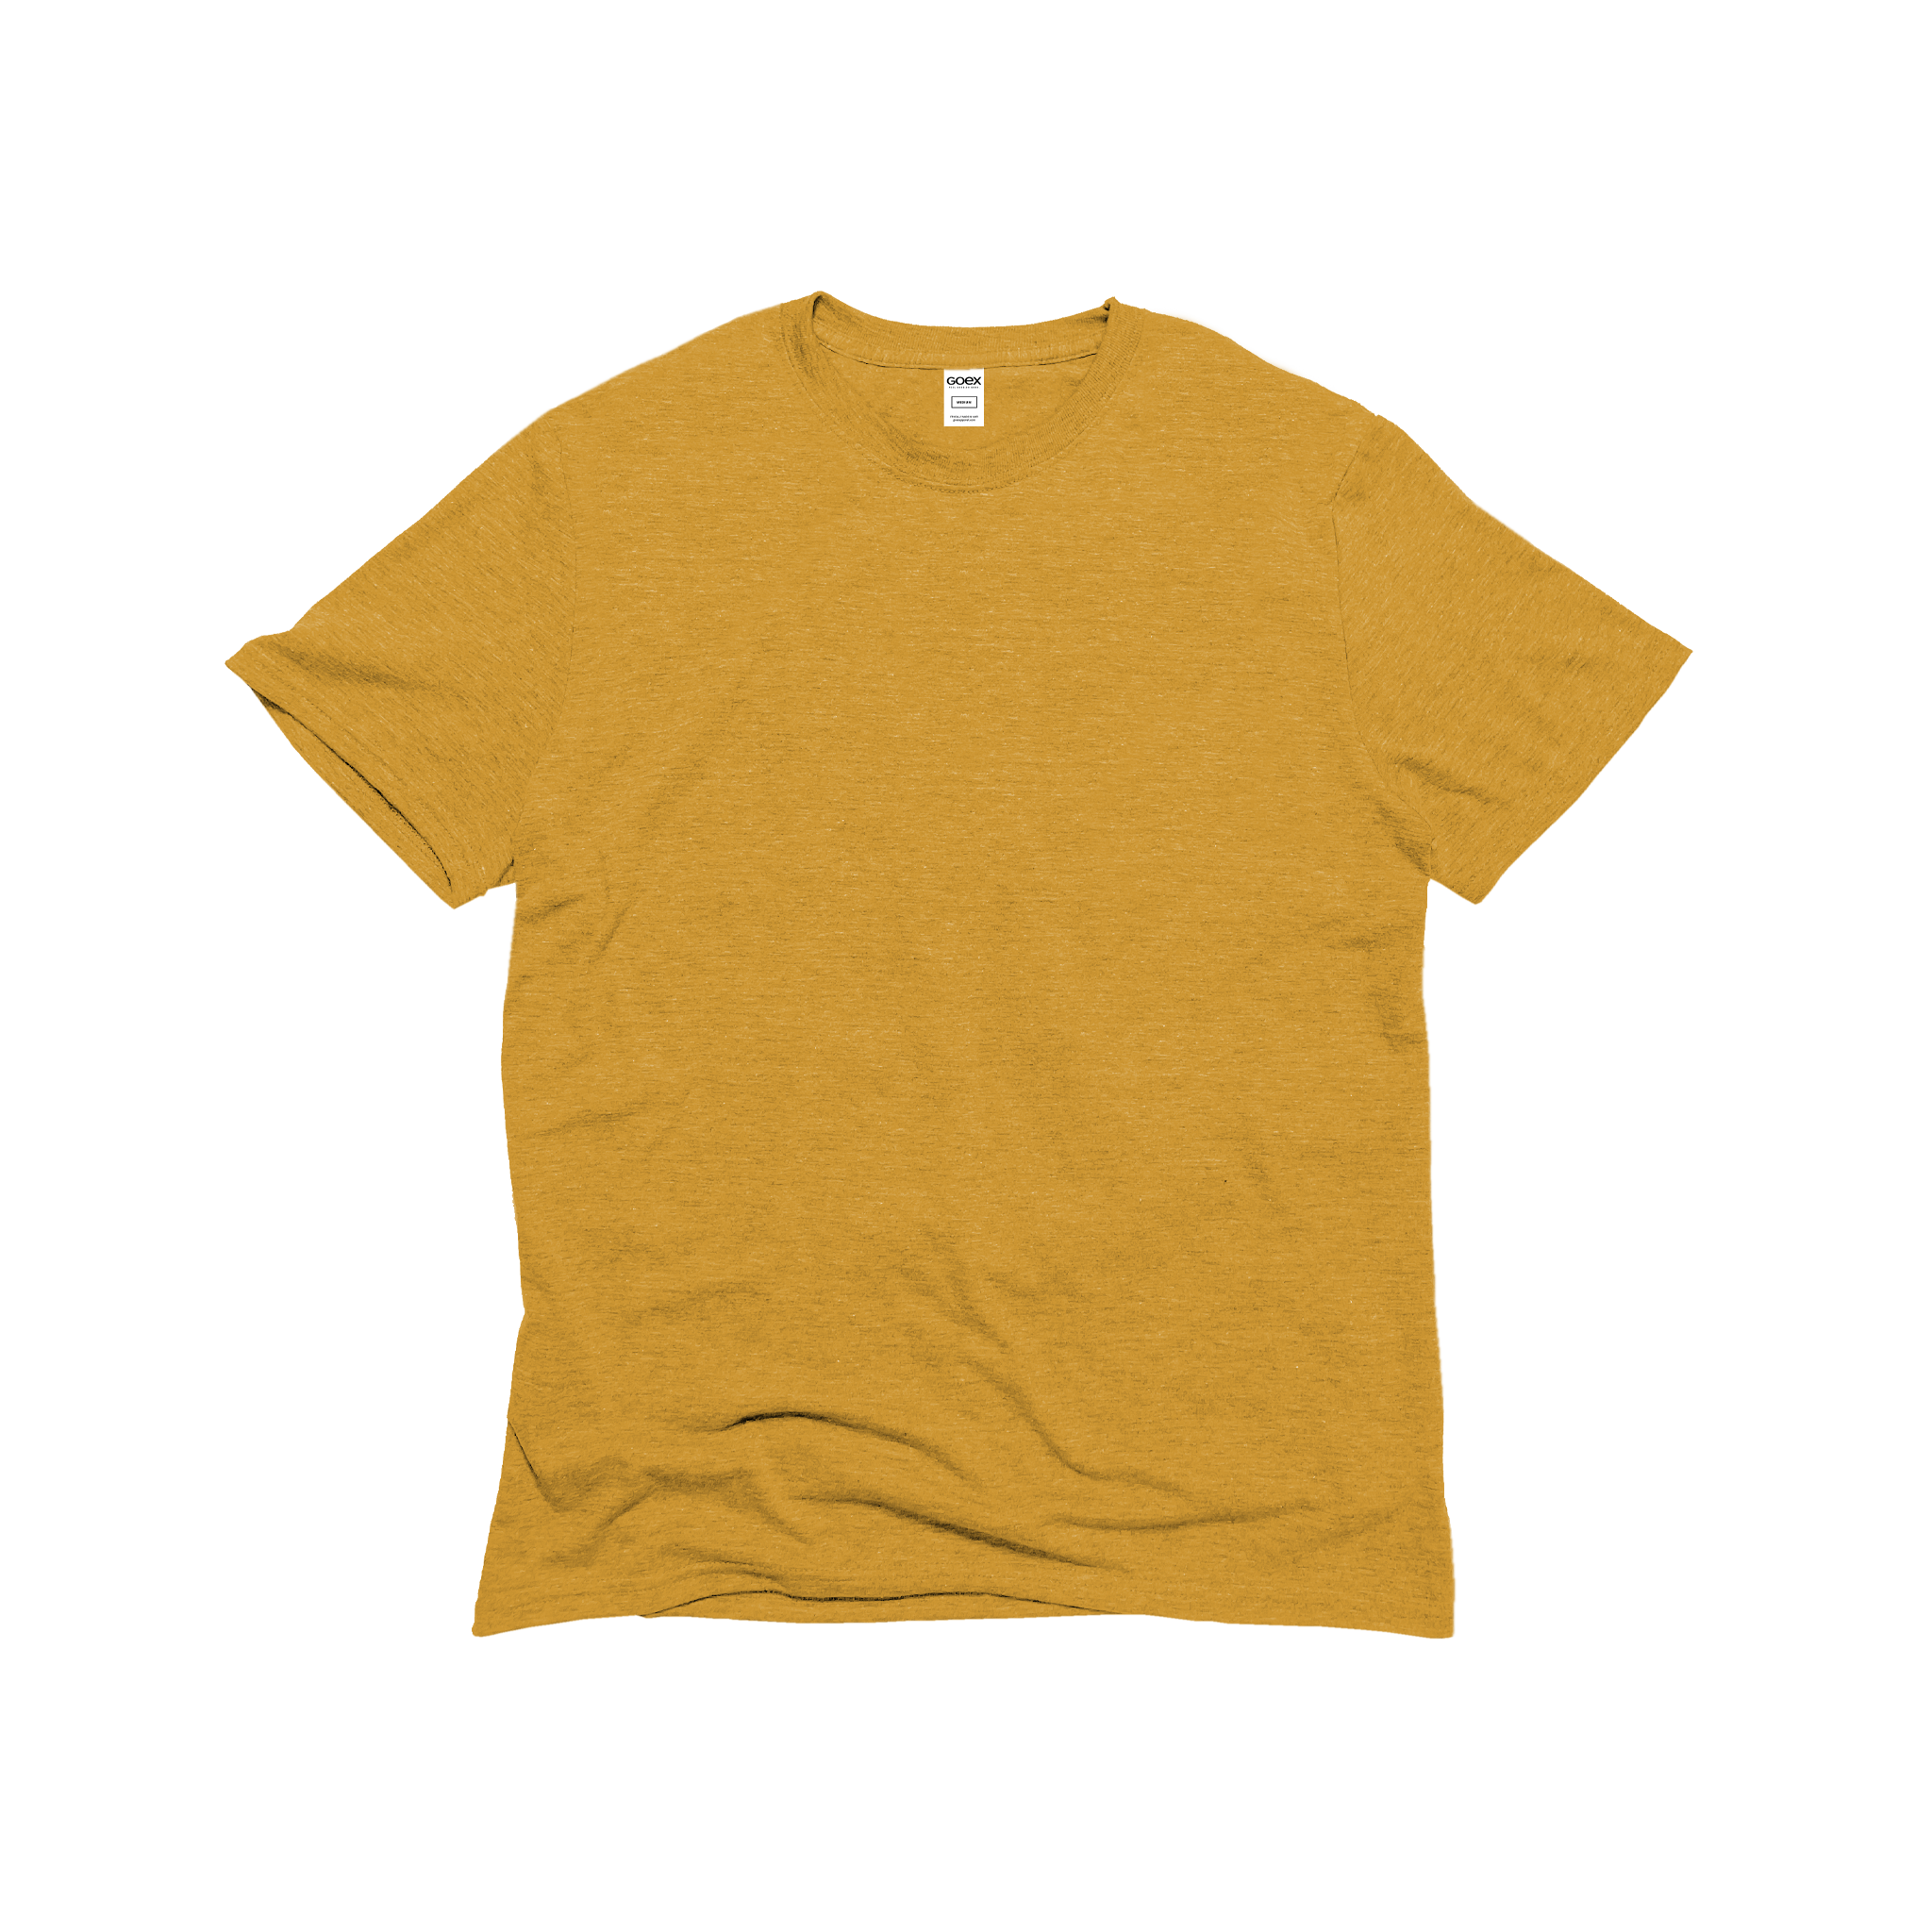 Front Flat Lay of GOEX Unisex and Men's Eco Triblend Tee in Mustard